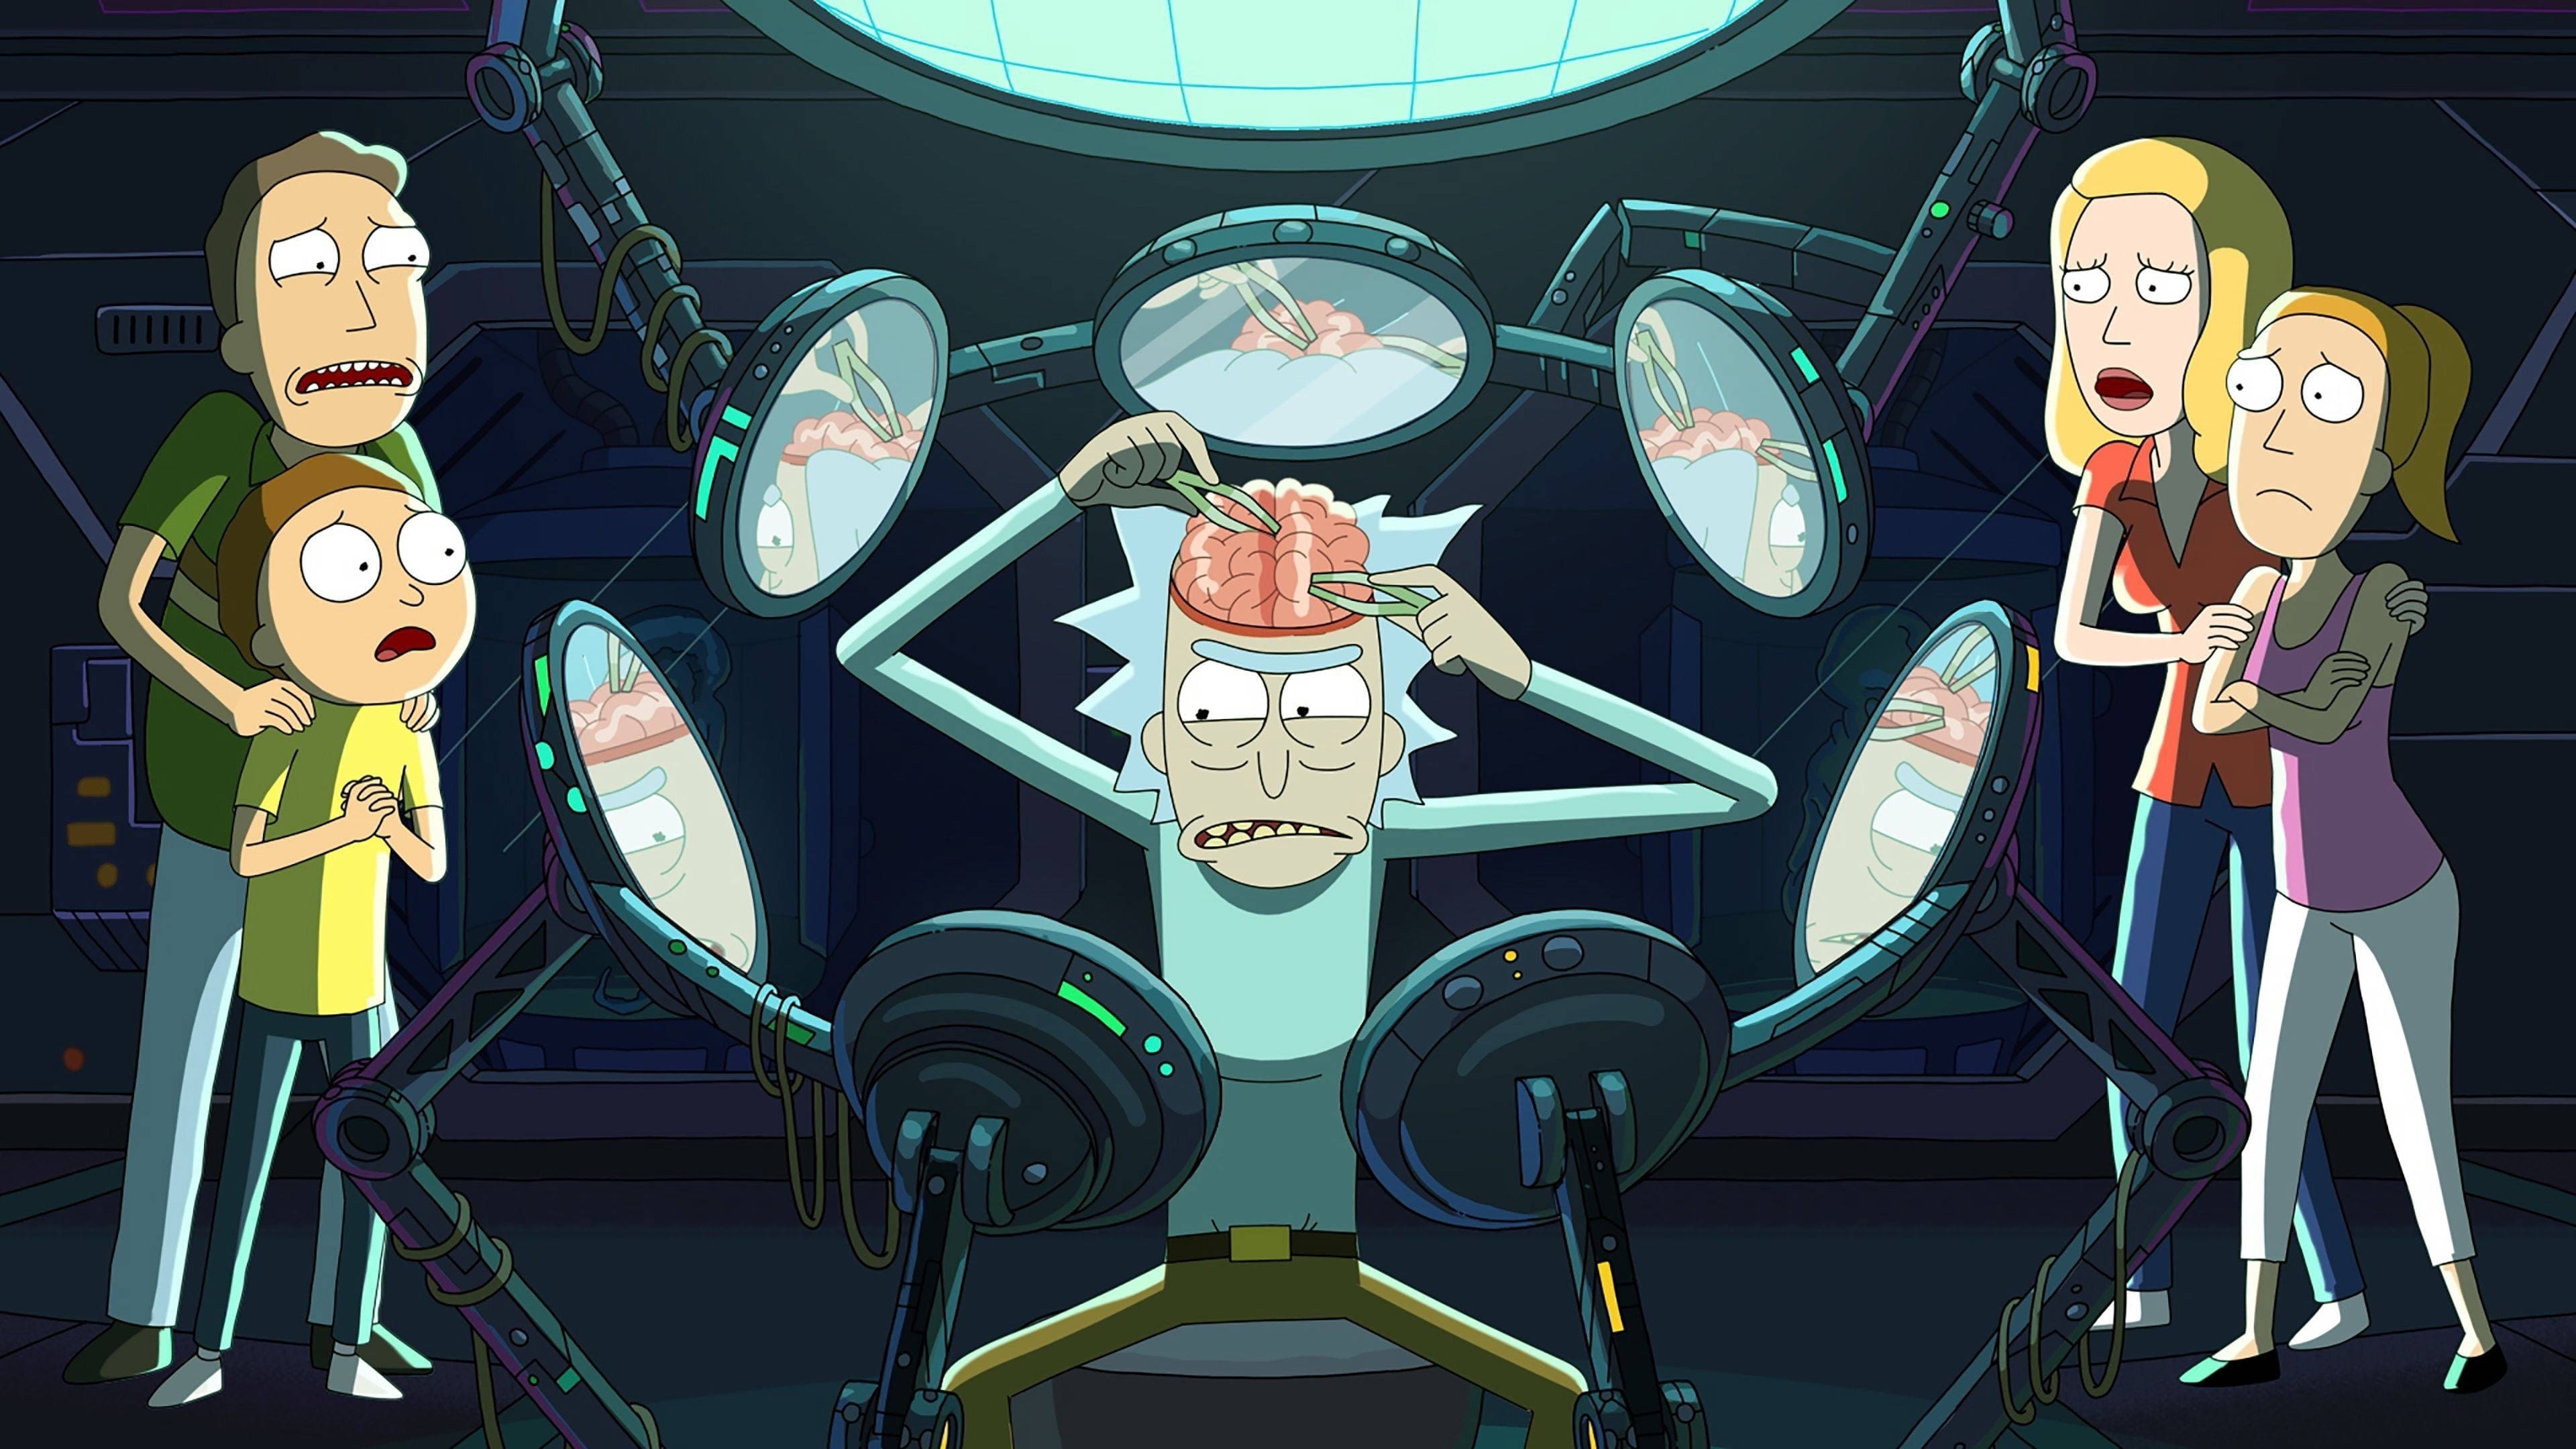 Watch Rick and Morty season 5 episode 2 streaming online | BetaSeries.com - Rick And Morty Season 5 Episode 2 Watch Online